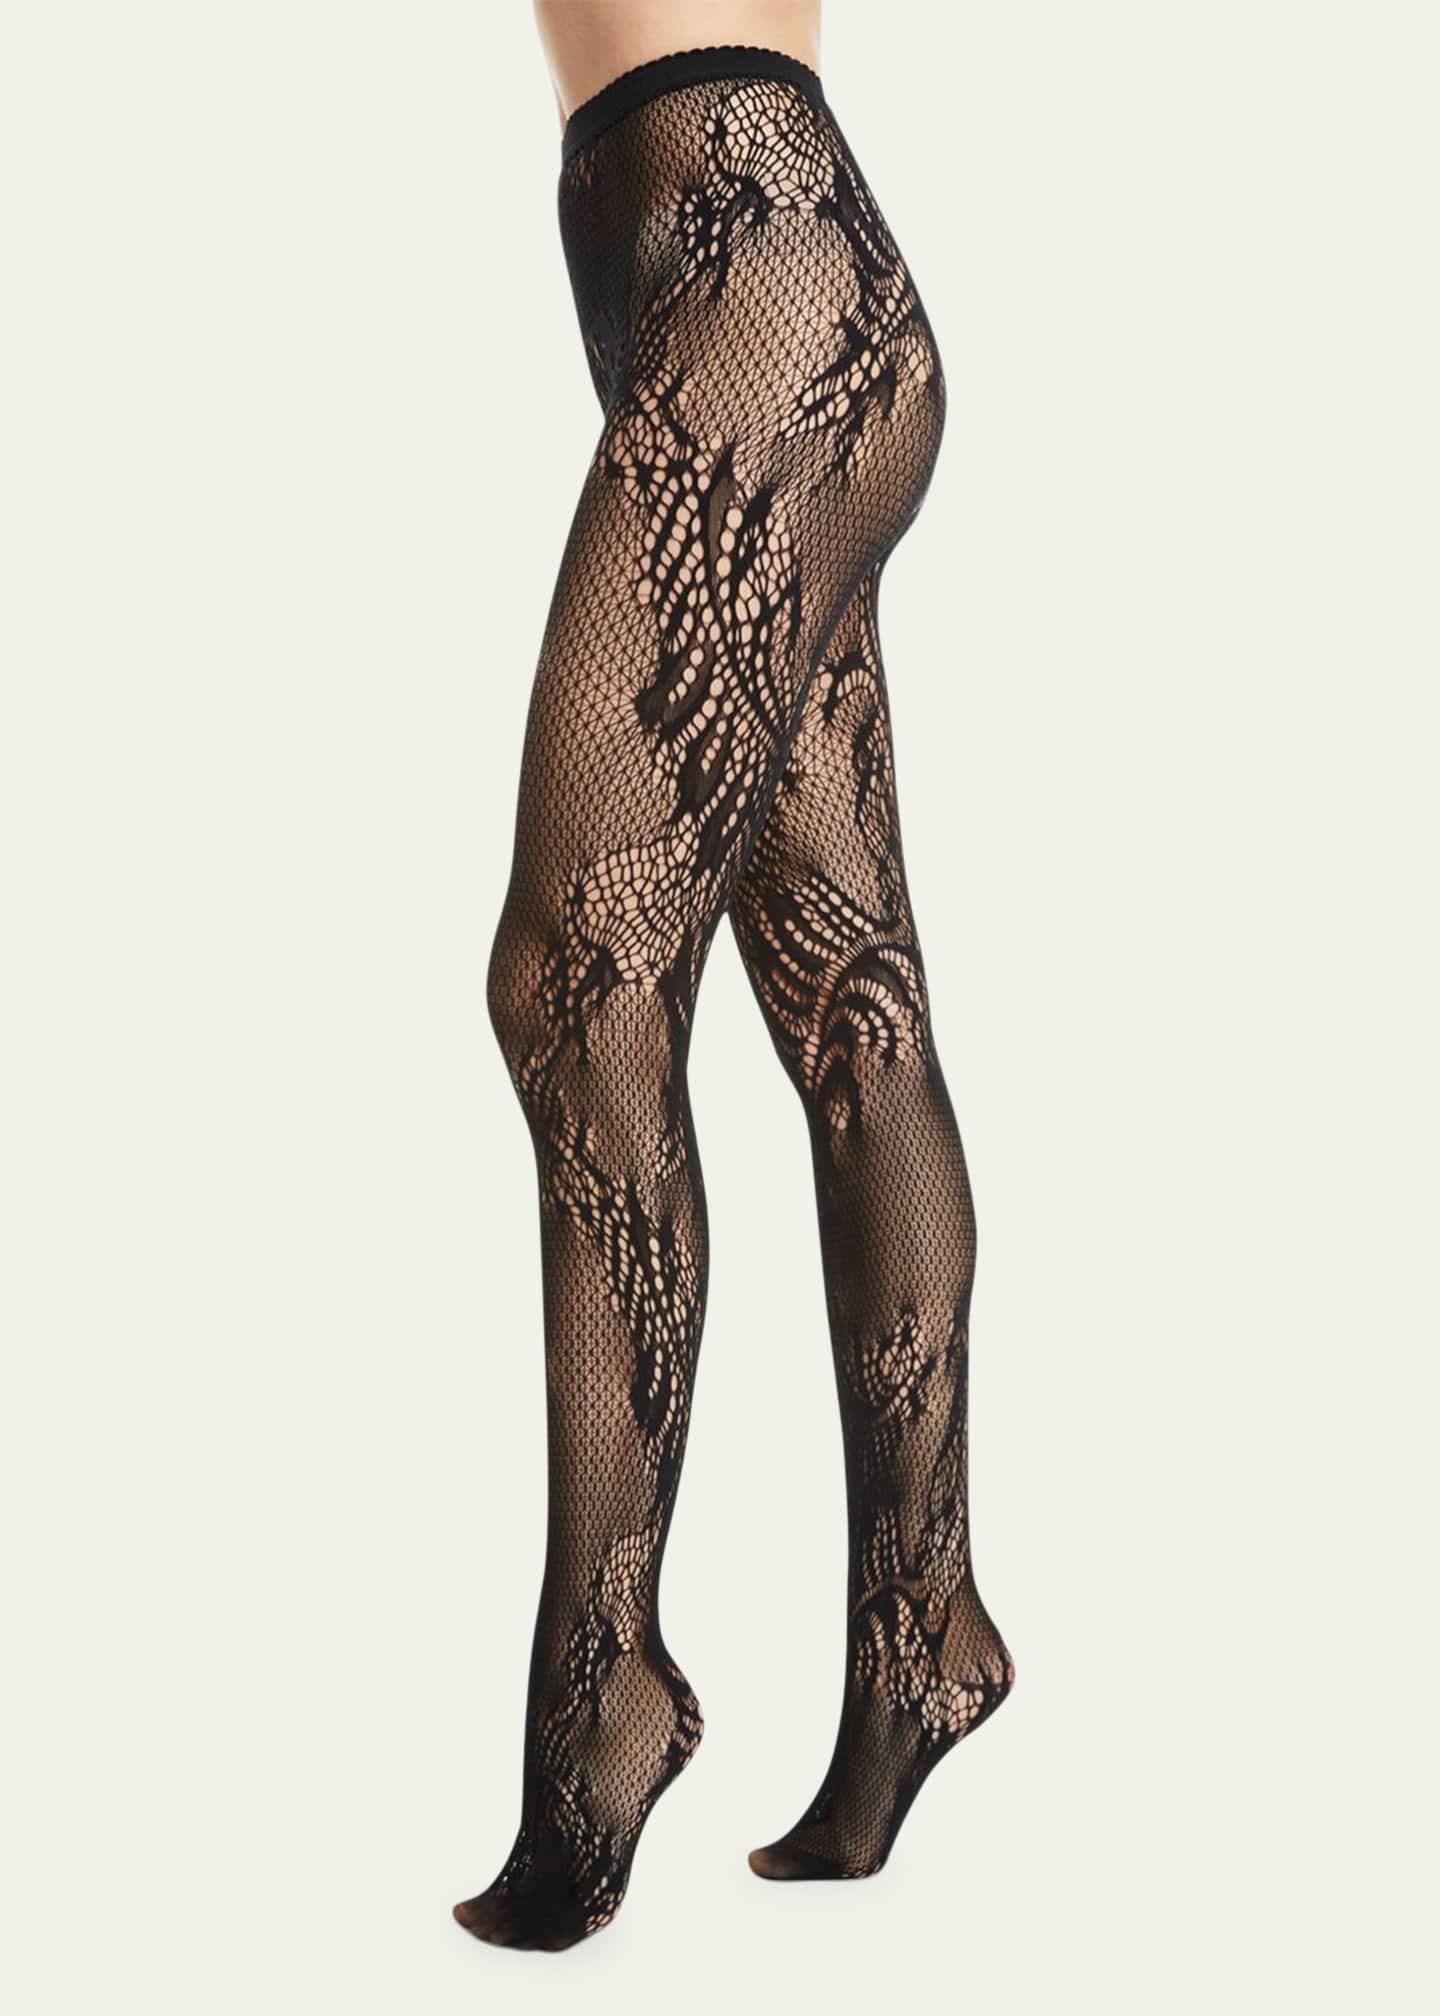 All Colors Lace Effect Sheer Tights